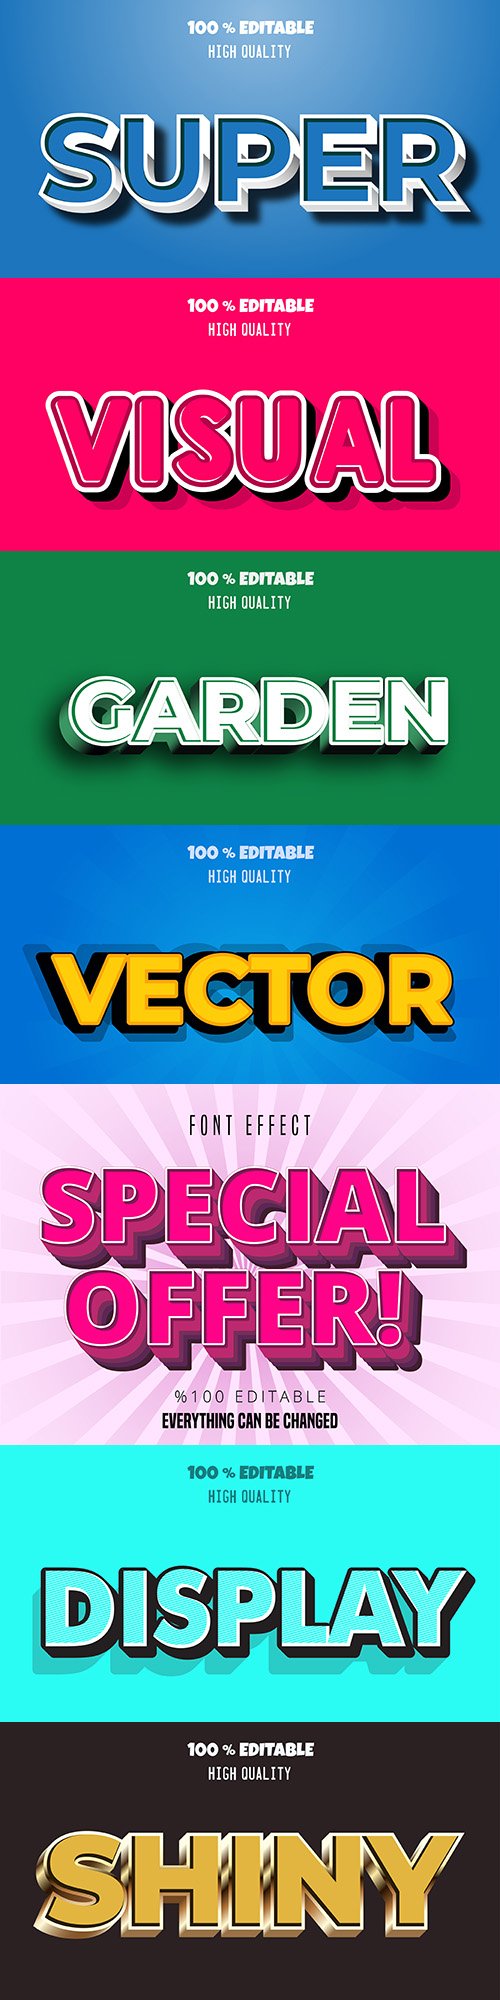 Font effect editable collection illustration 8